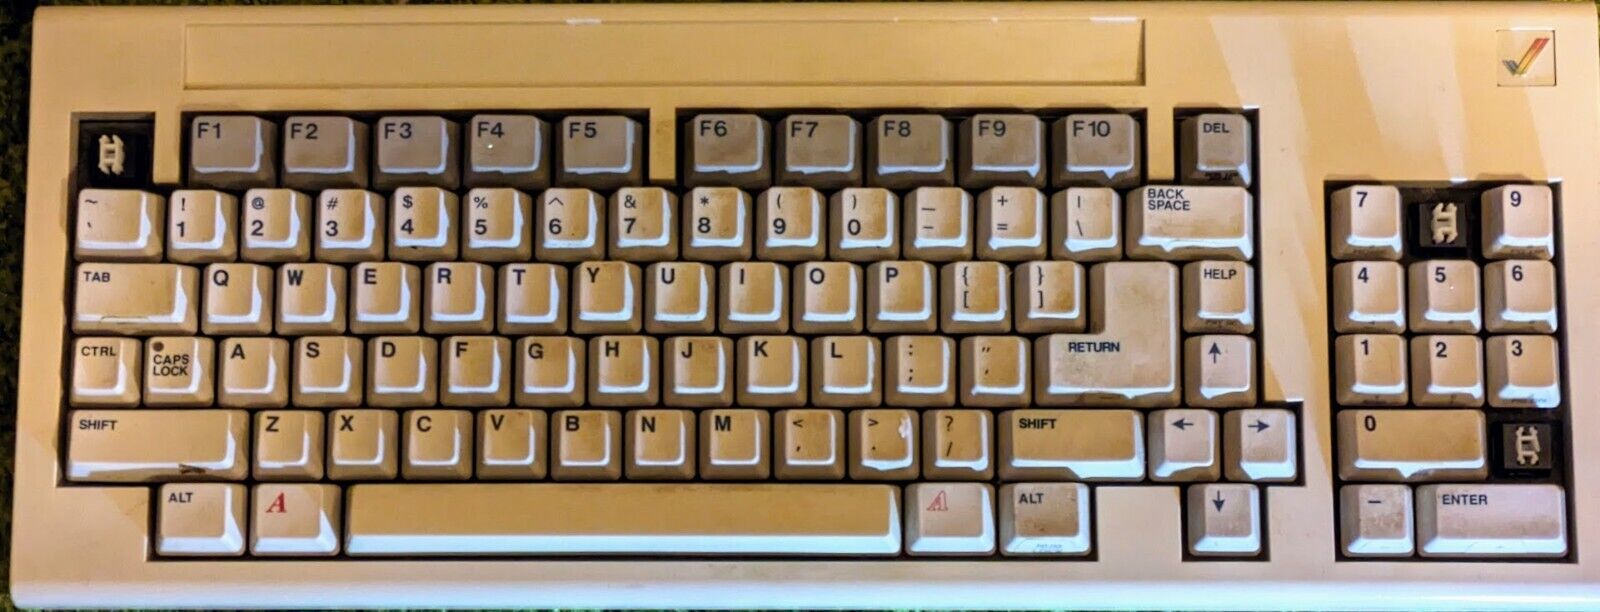 Vintage COMMODORE AMIGA A1000 Keyboard & Mouse Untested - As Is - Parts & Repair